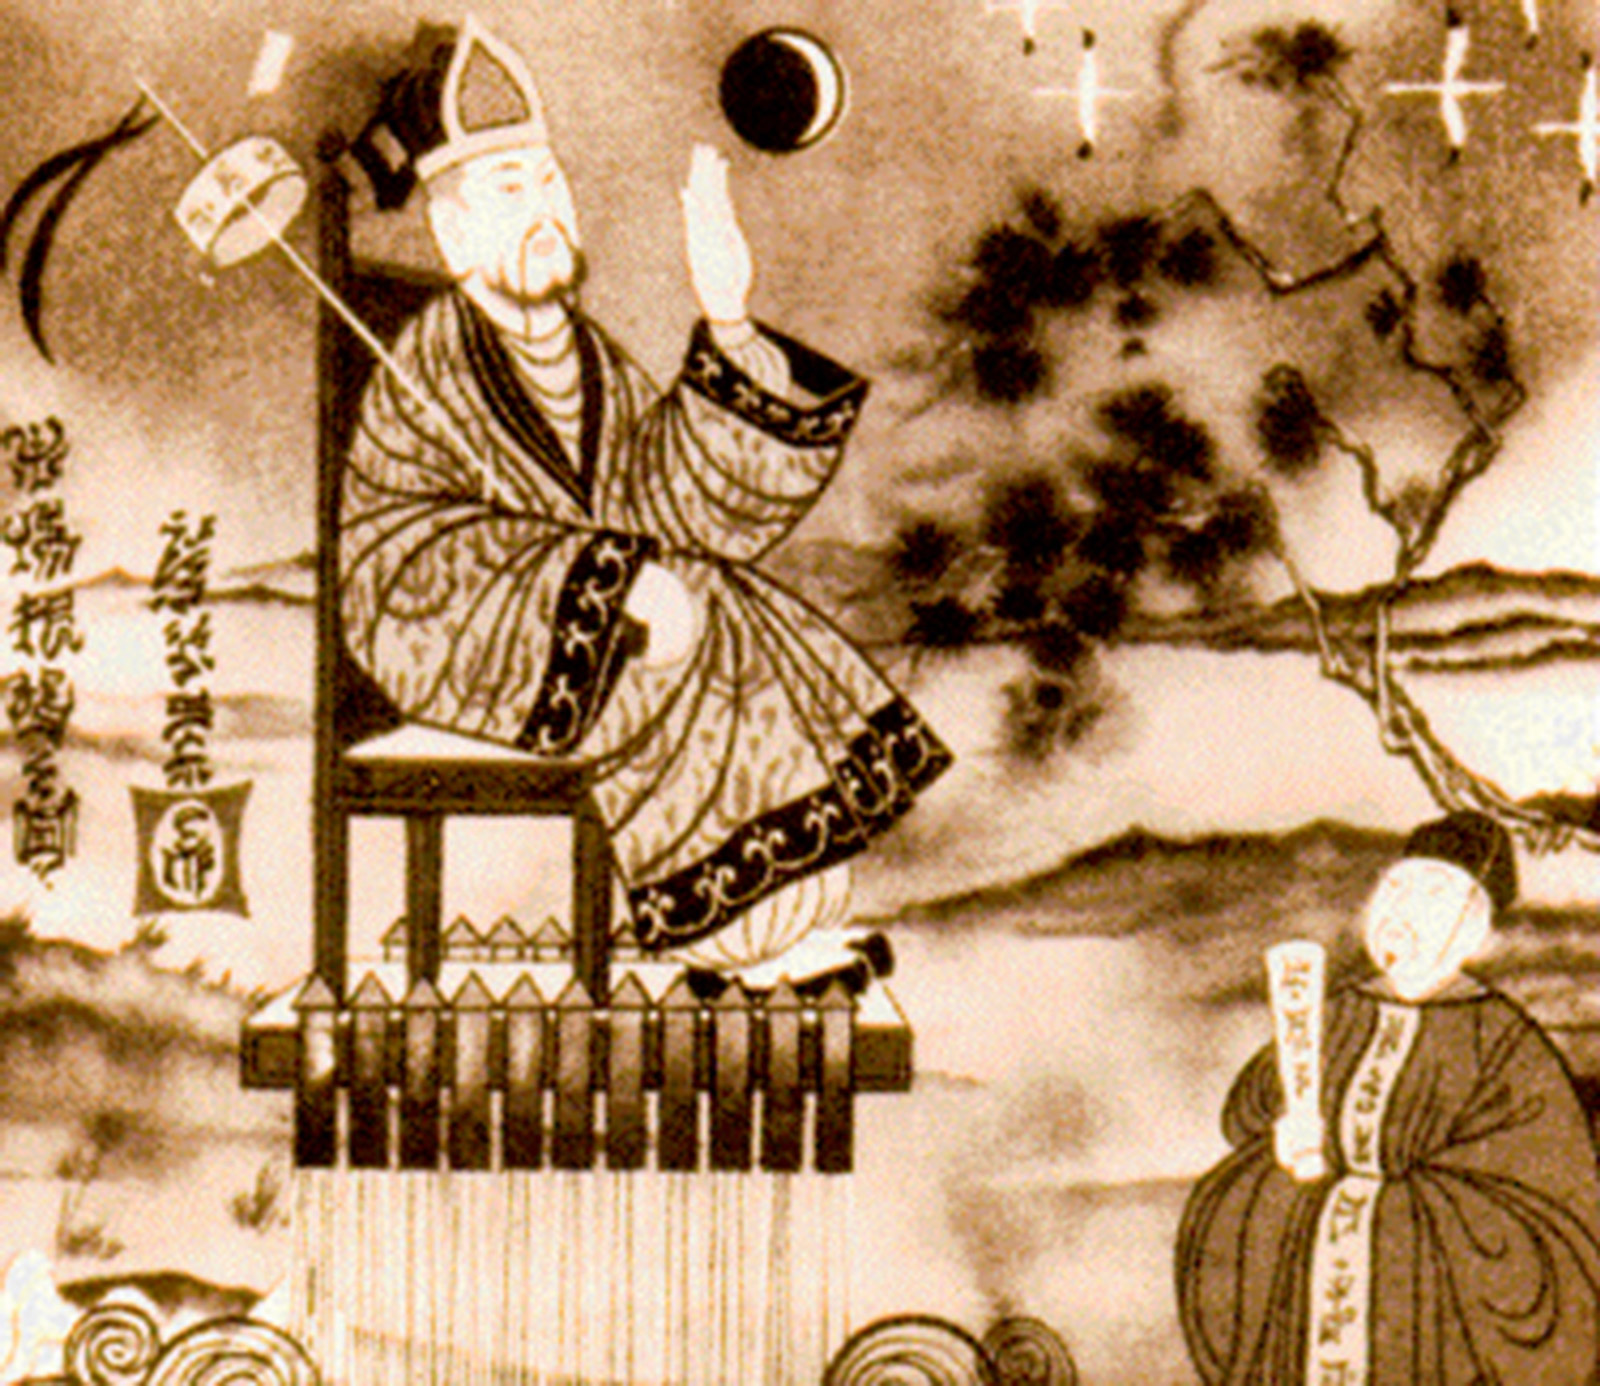 An illustration of Wan Hu sitting on his airborne chair.